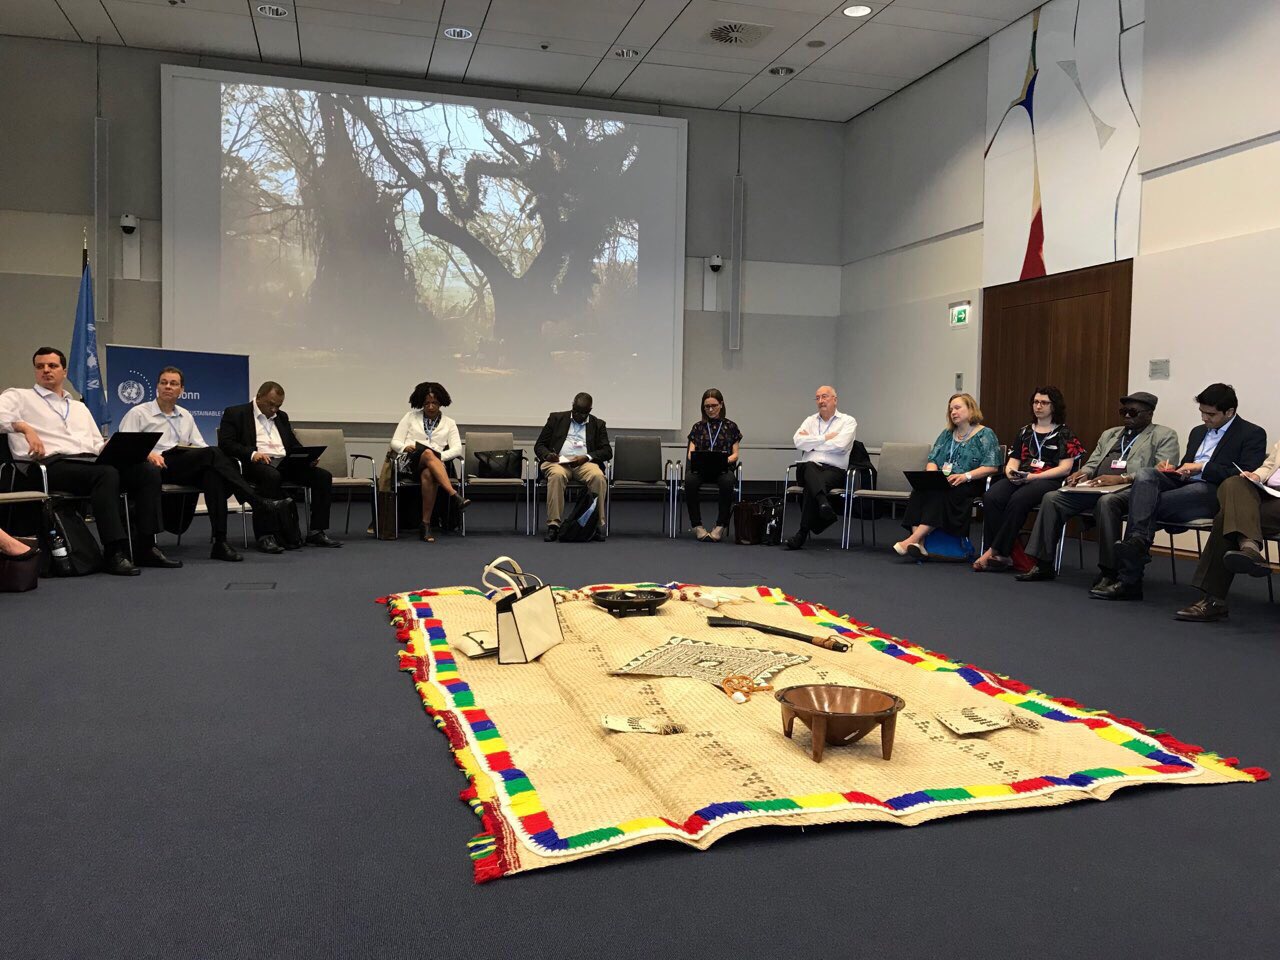 Talanoa Dialogue at the 2018 Climate Change Conference in Bonn, Germany